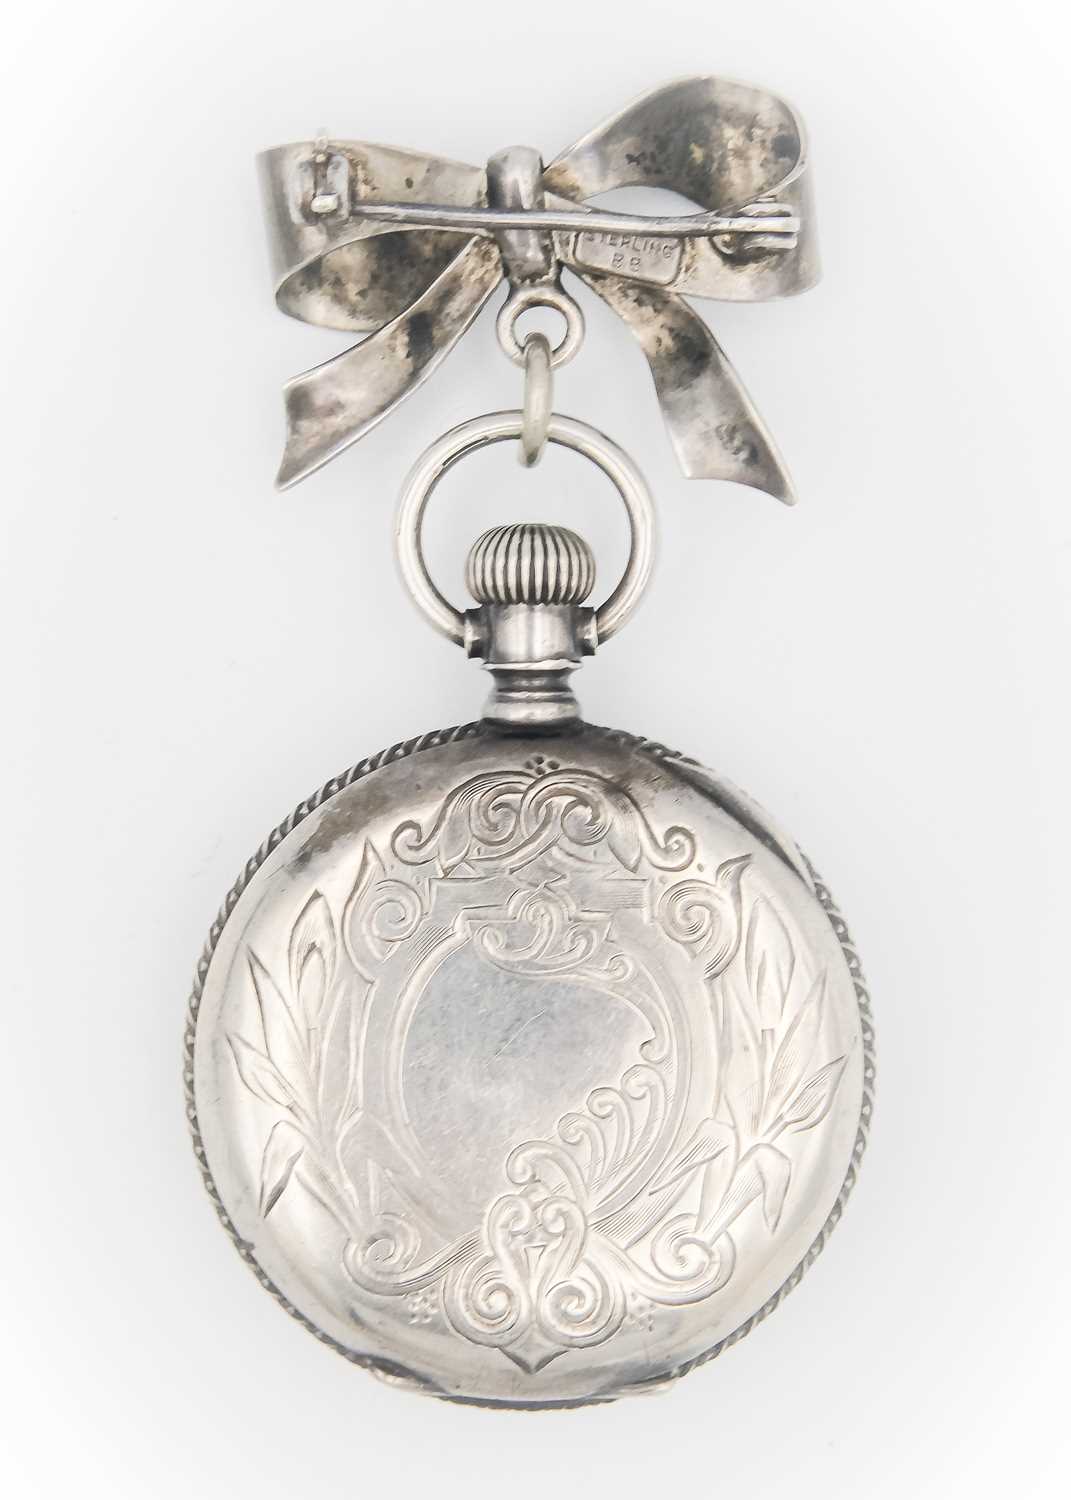 OMEGA - A silver cased crown wind fob pocket watch on silver bow brooch. - Image 4 of 4